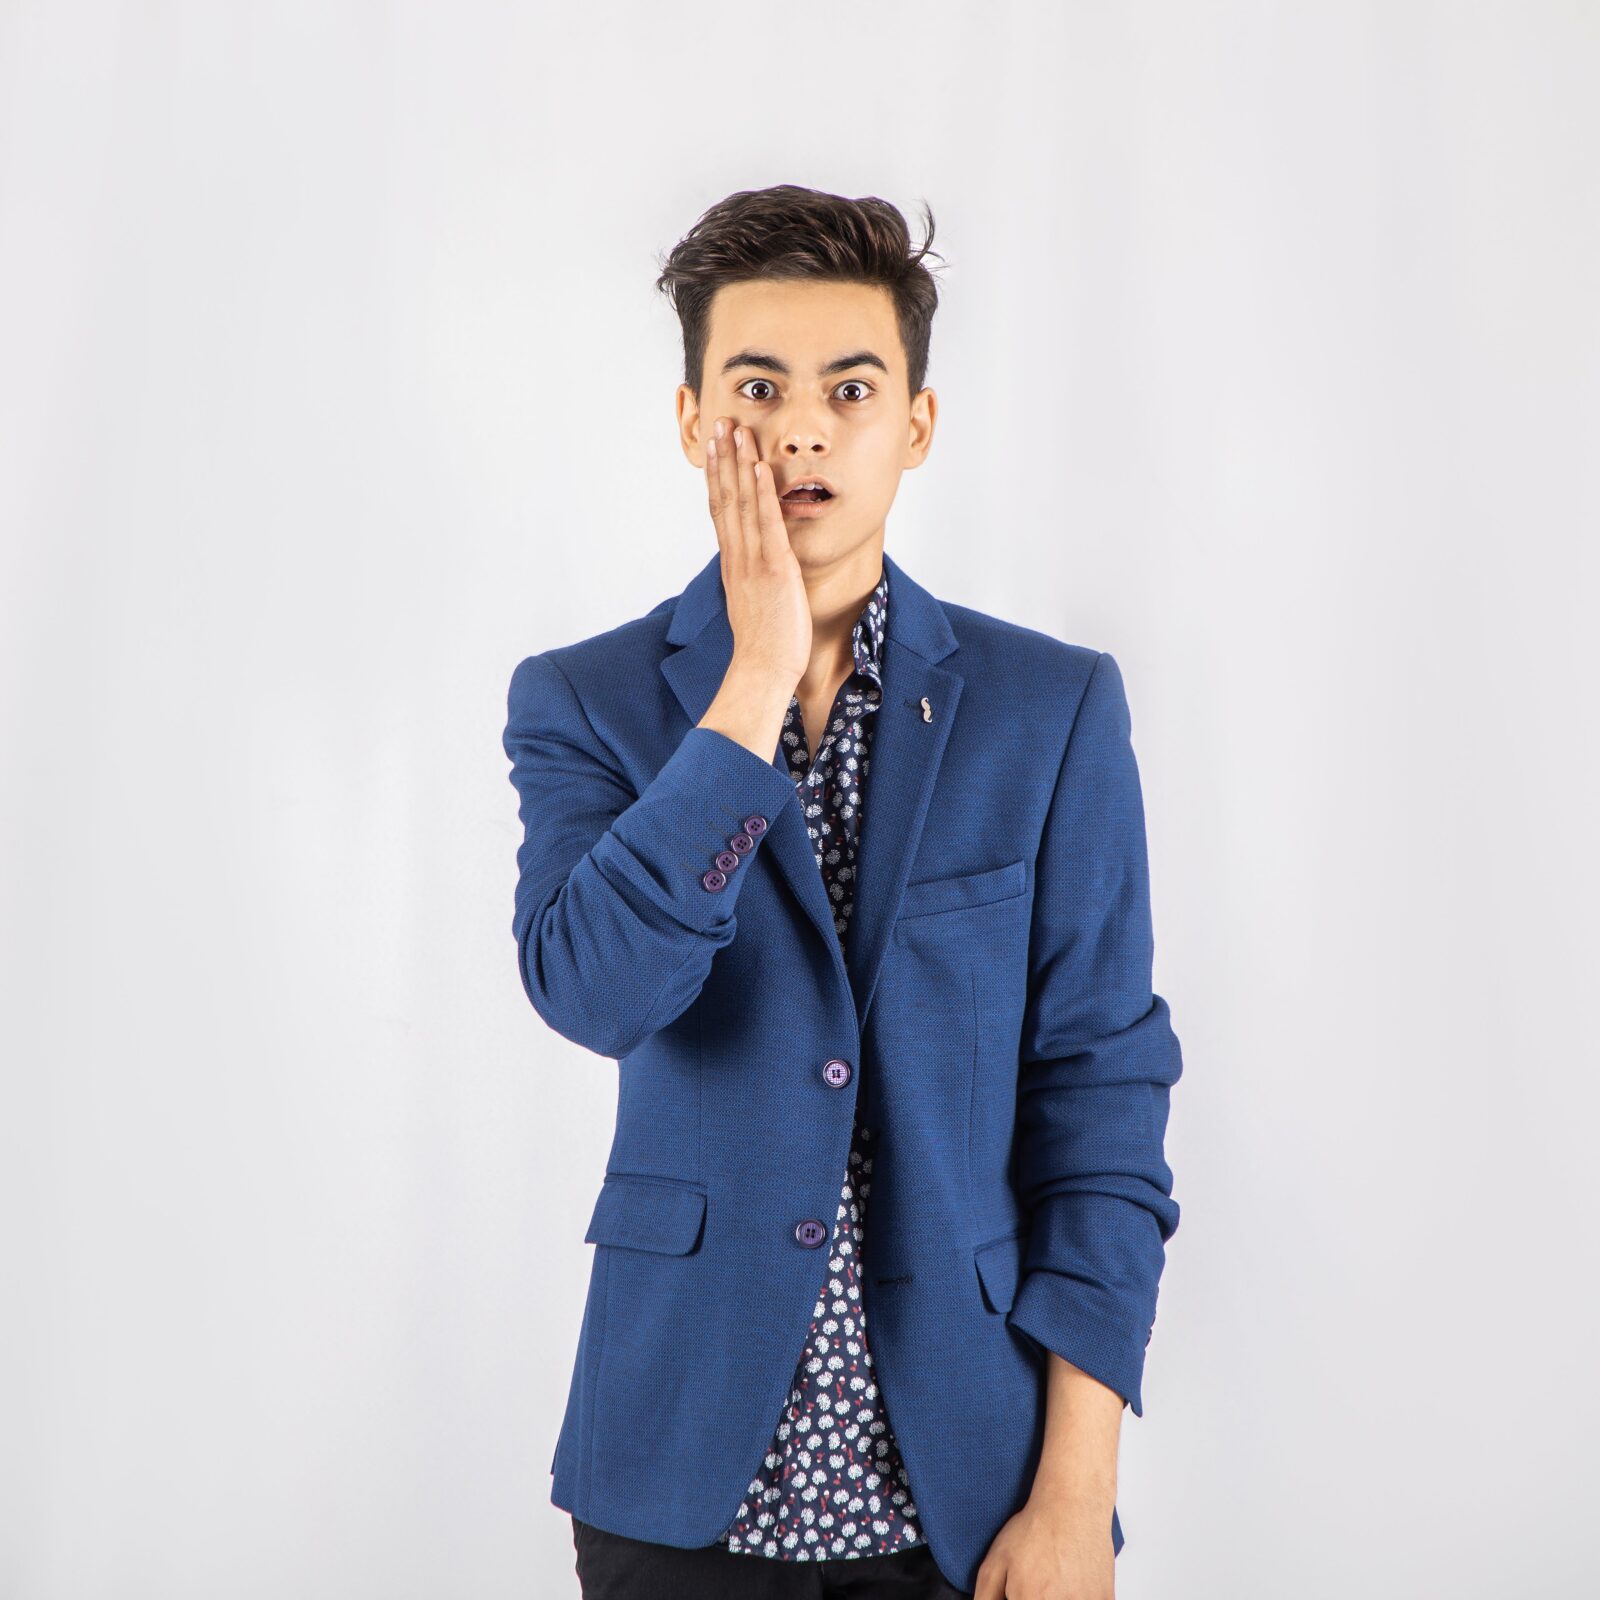 Photo of Shocked Man in Blue Blazer Standing In Front of White Background